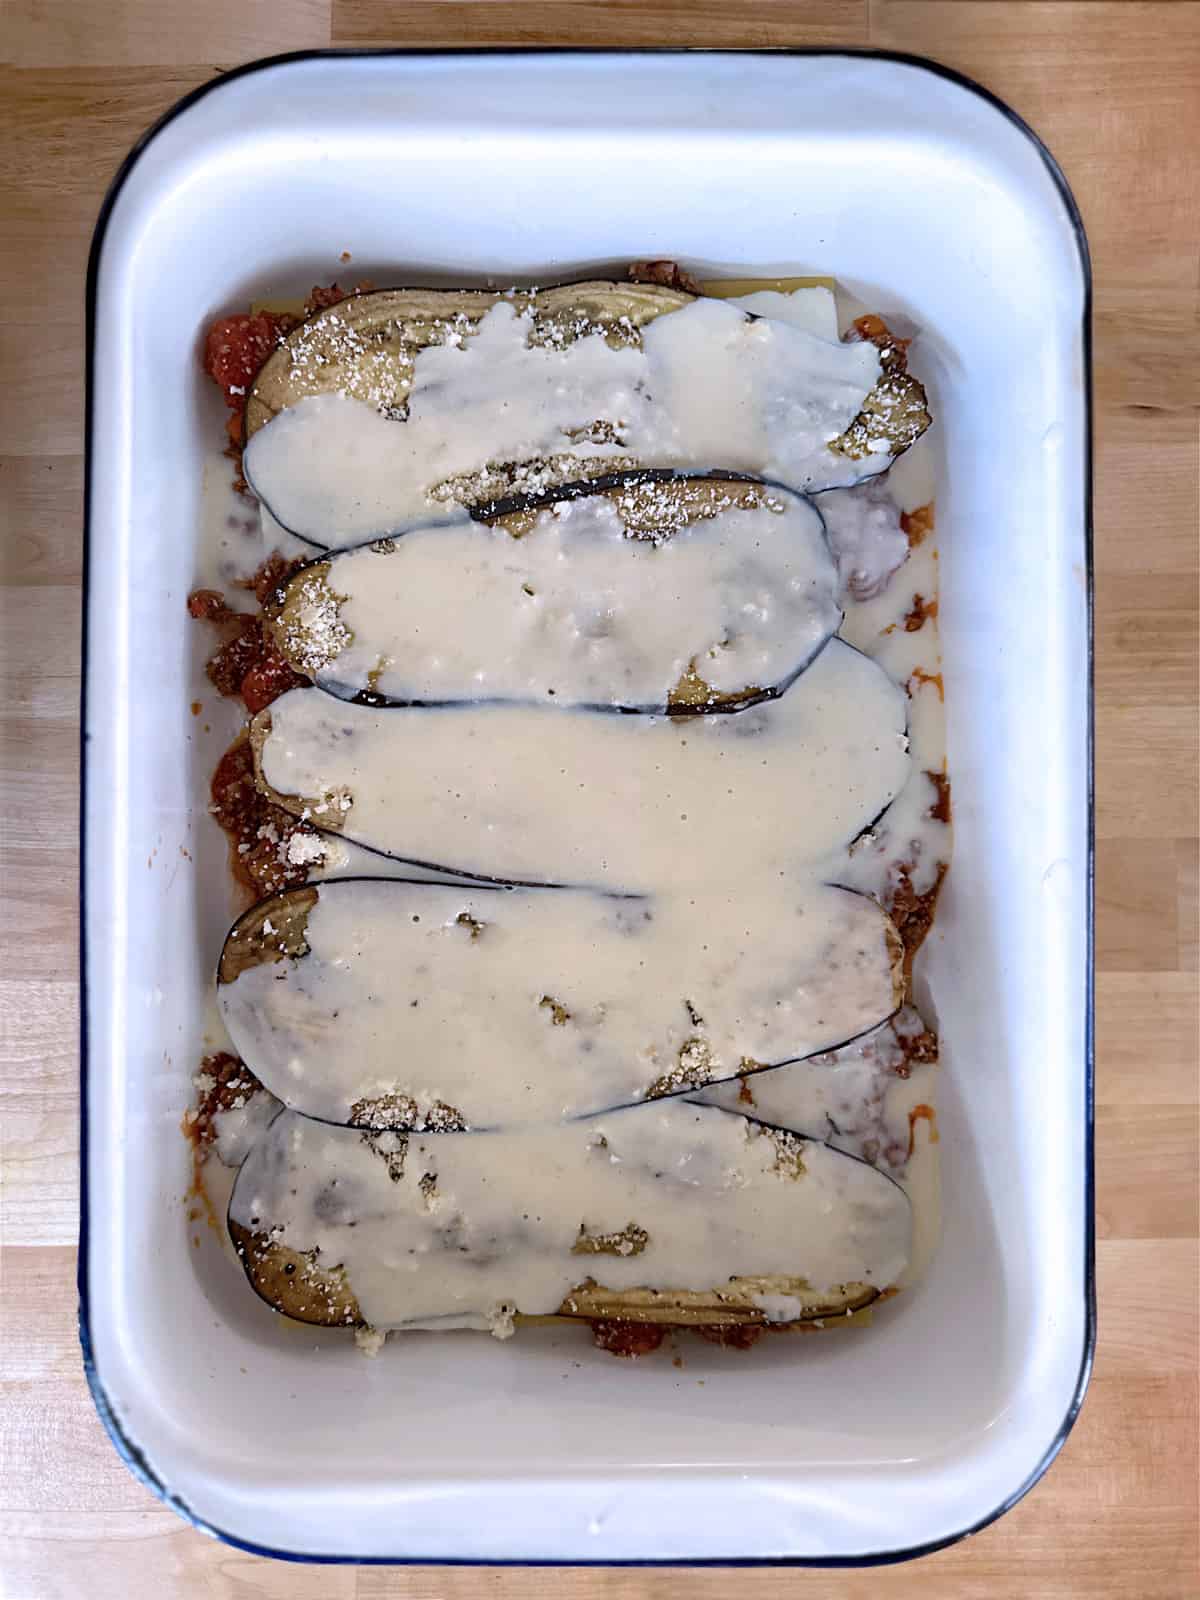 A baking pan lined with meat sauce, eggplant slices and béchamel.